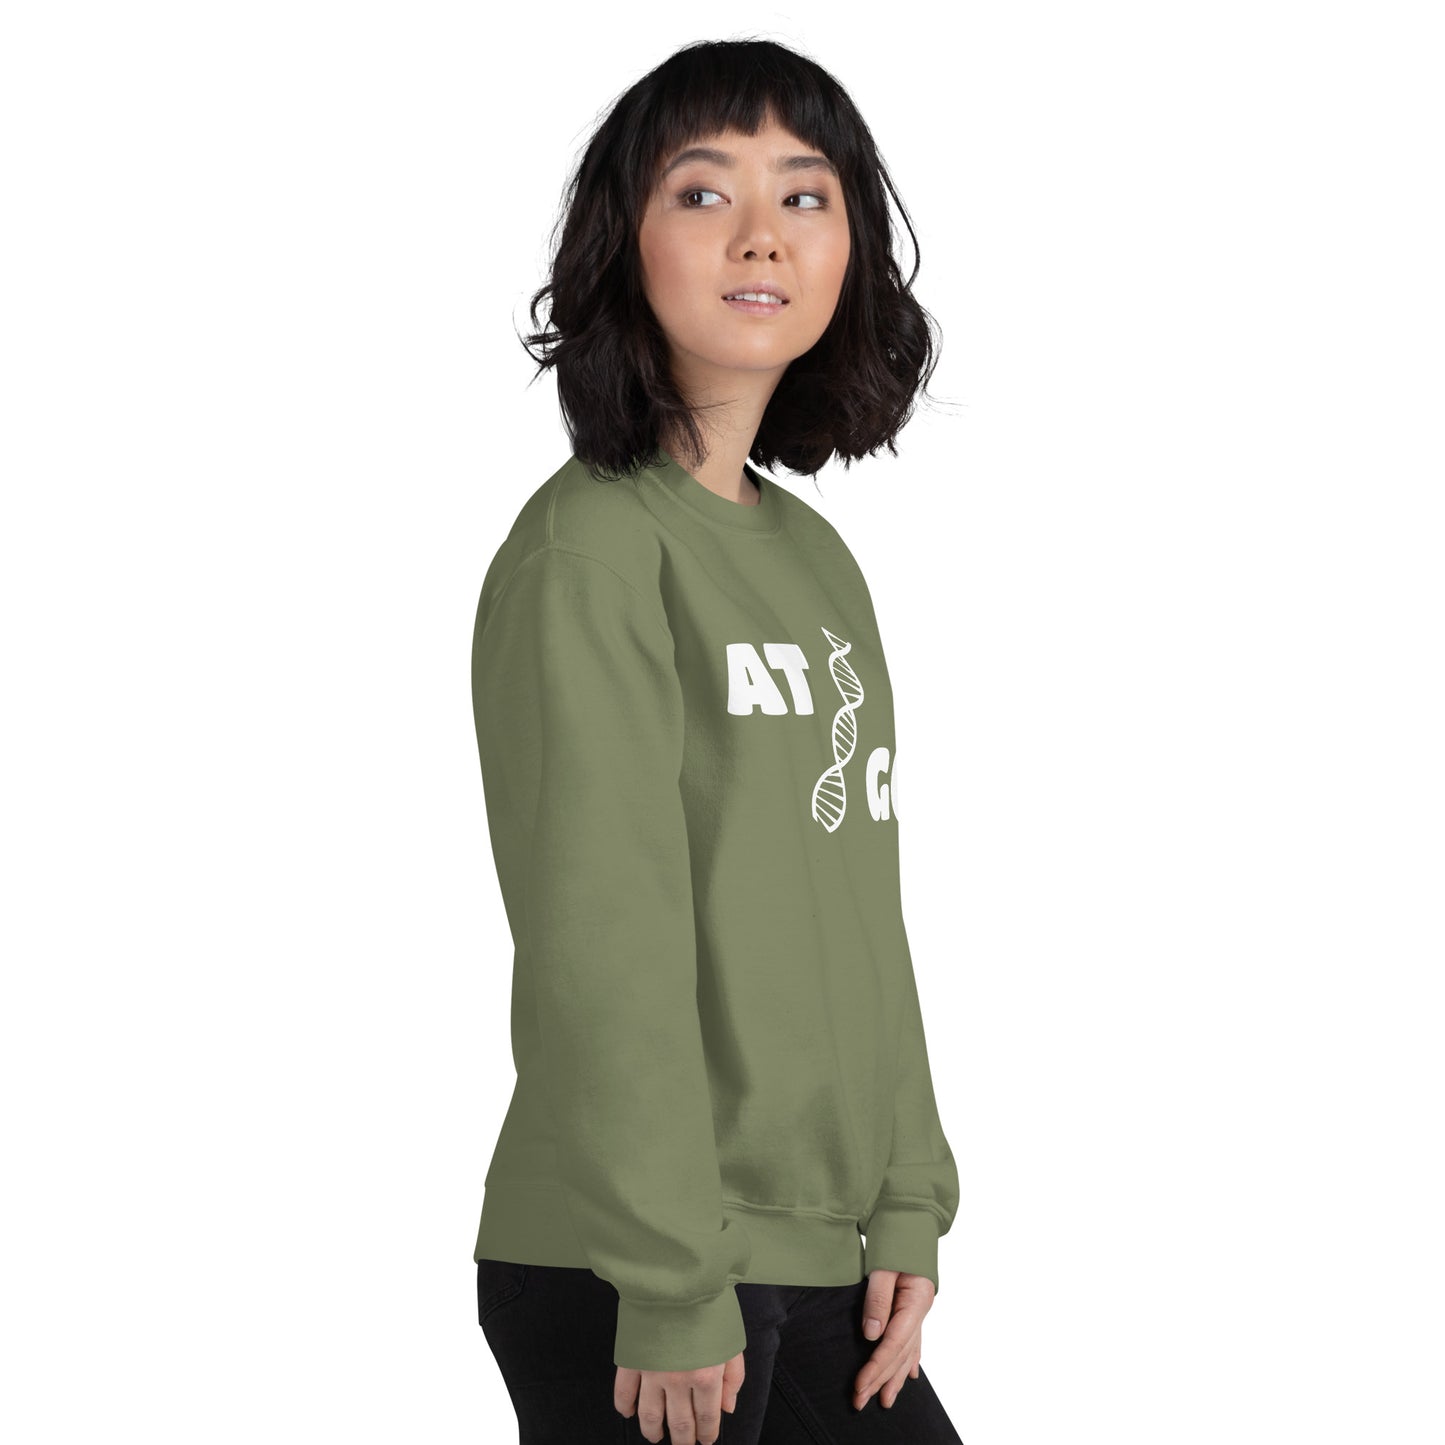 Women with military green sweatshirt with image of a DNA string and the text "ATGC"